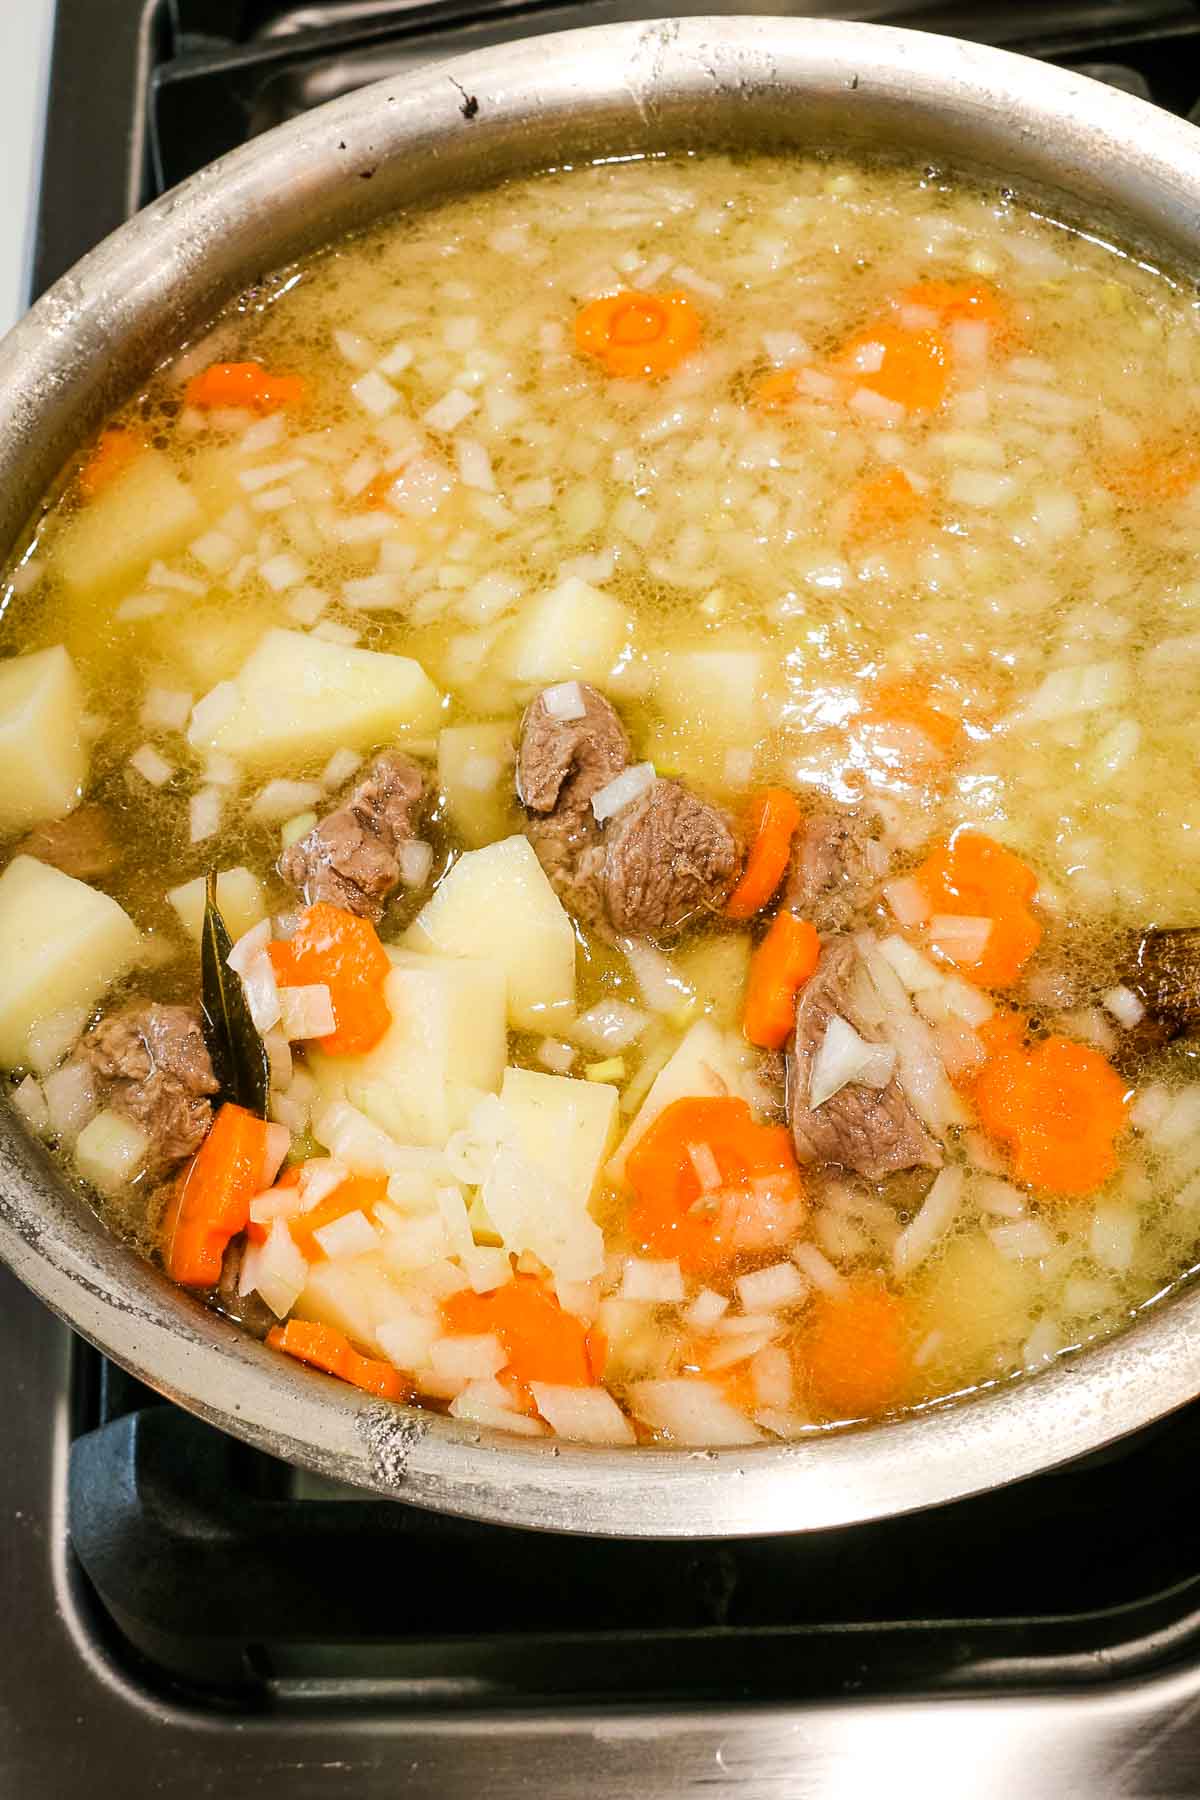 meat added back to lamb and vegetable soup in shurpa soup recipe.